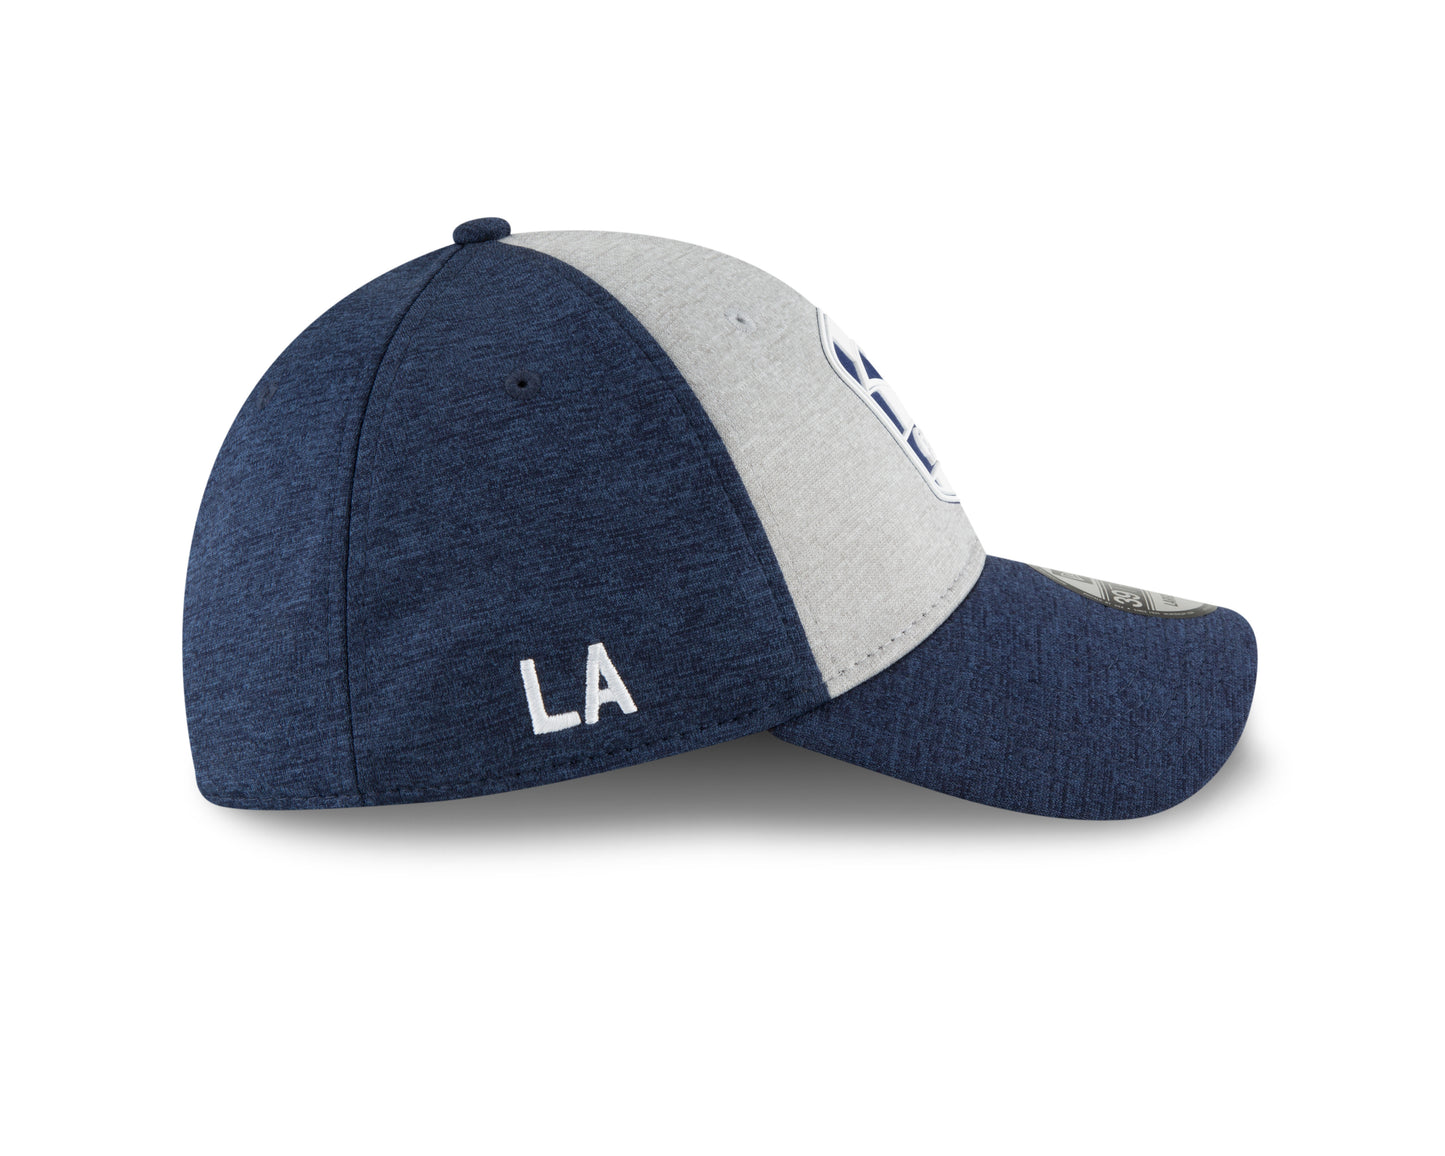 Los Angeles Rams New Era Blue NFL Sideline Official Road 39THIRTY Flex Hat